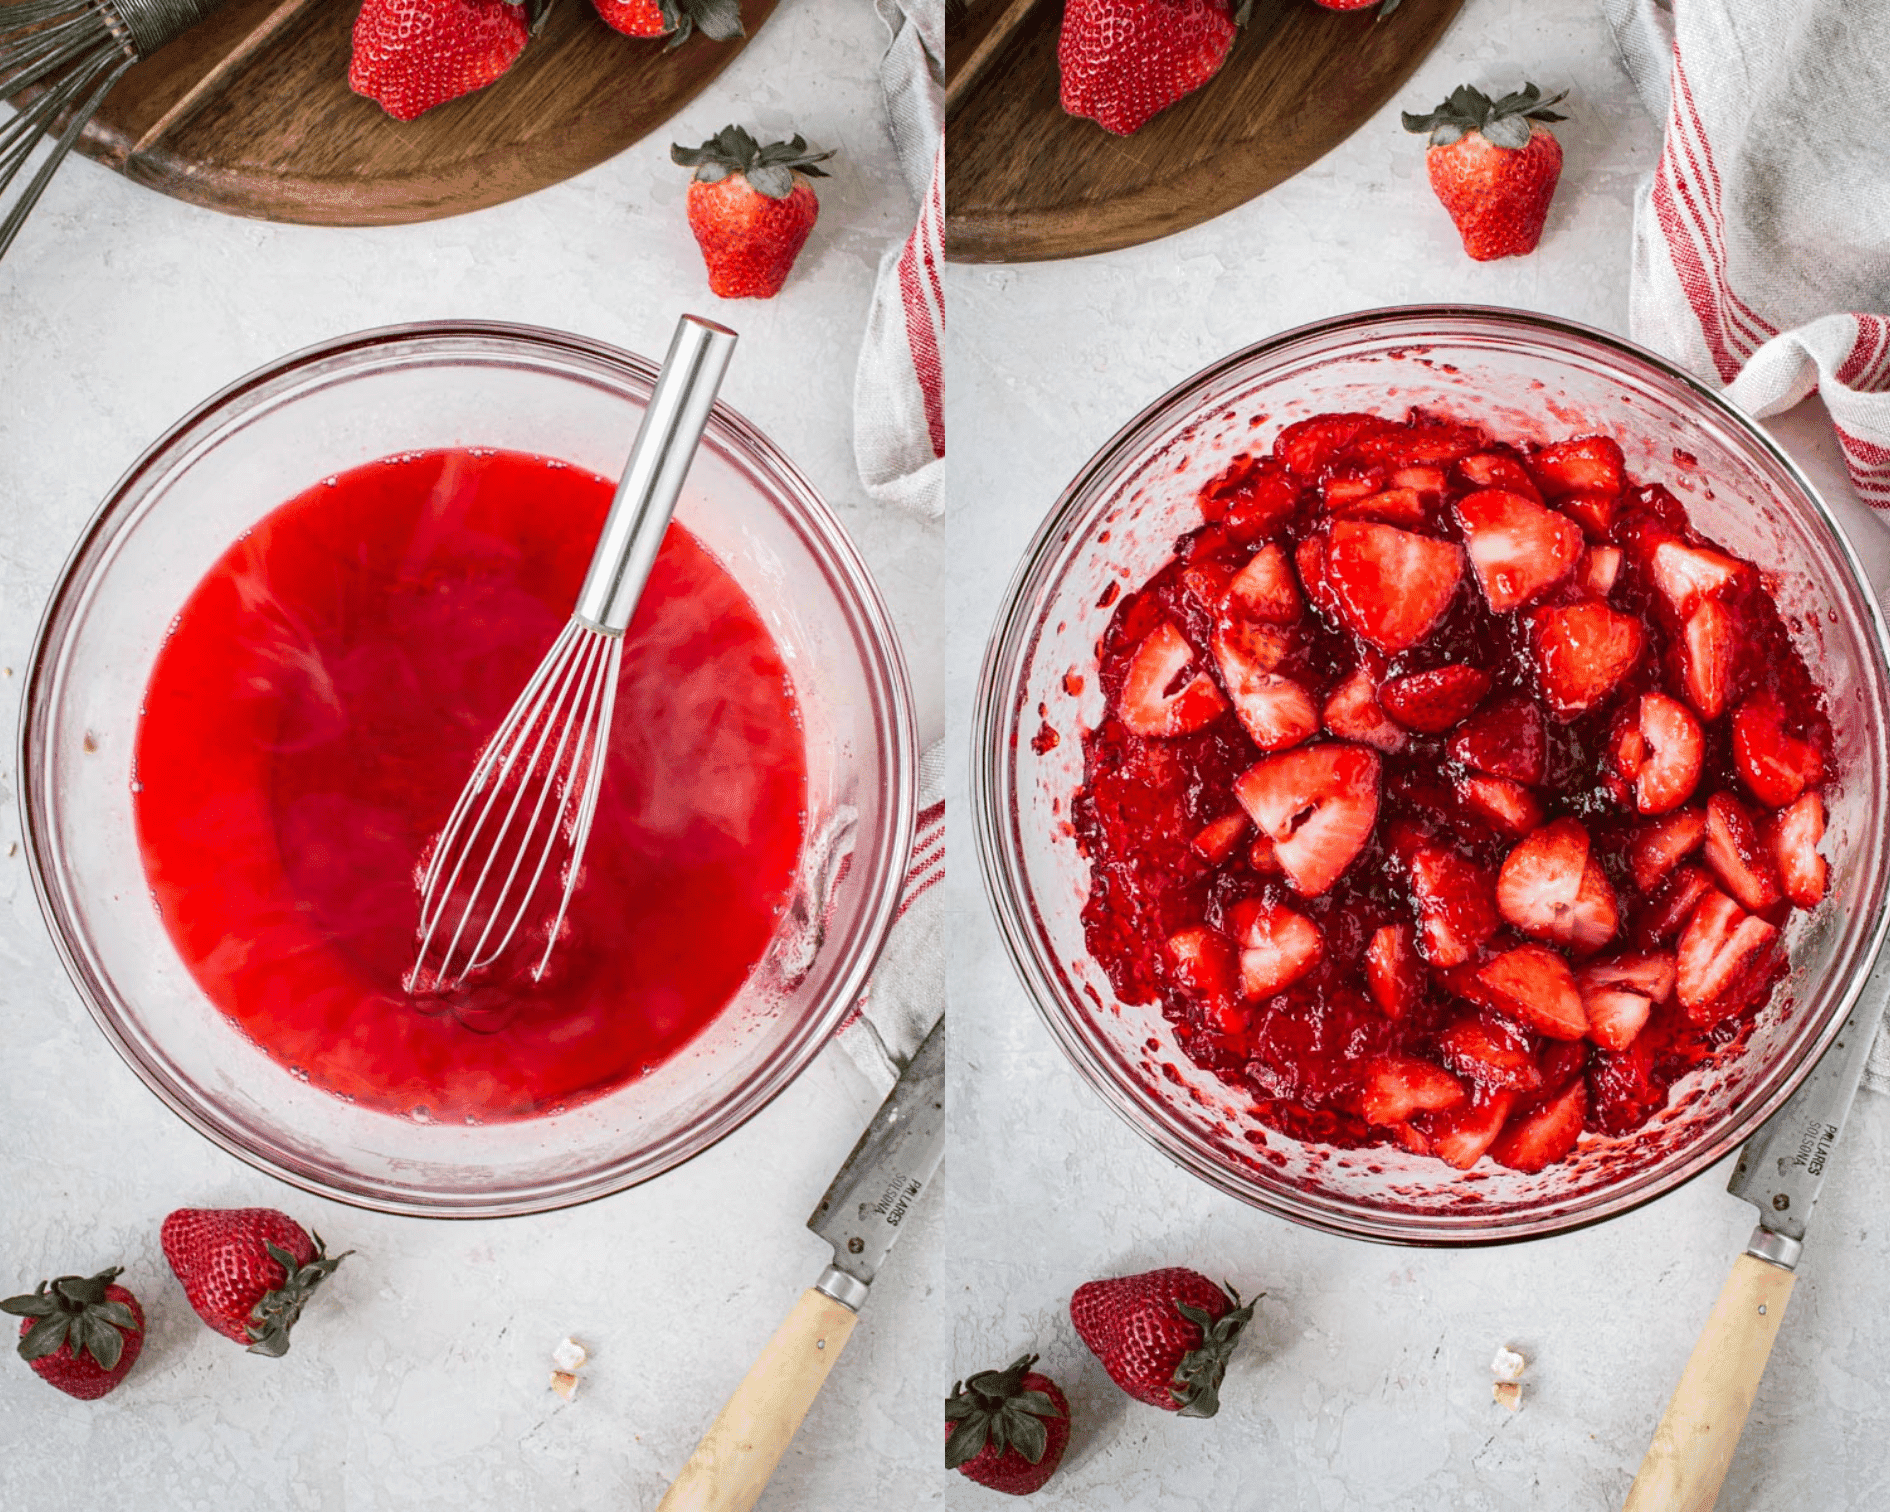 Strawberry Jell-O in mixing bowl on left and Jello with strawberries mixed in on right.